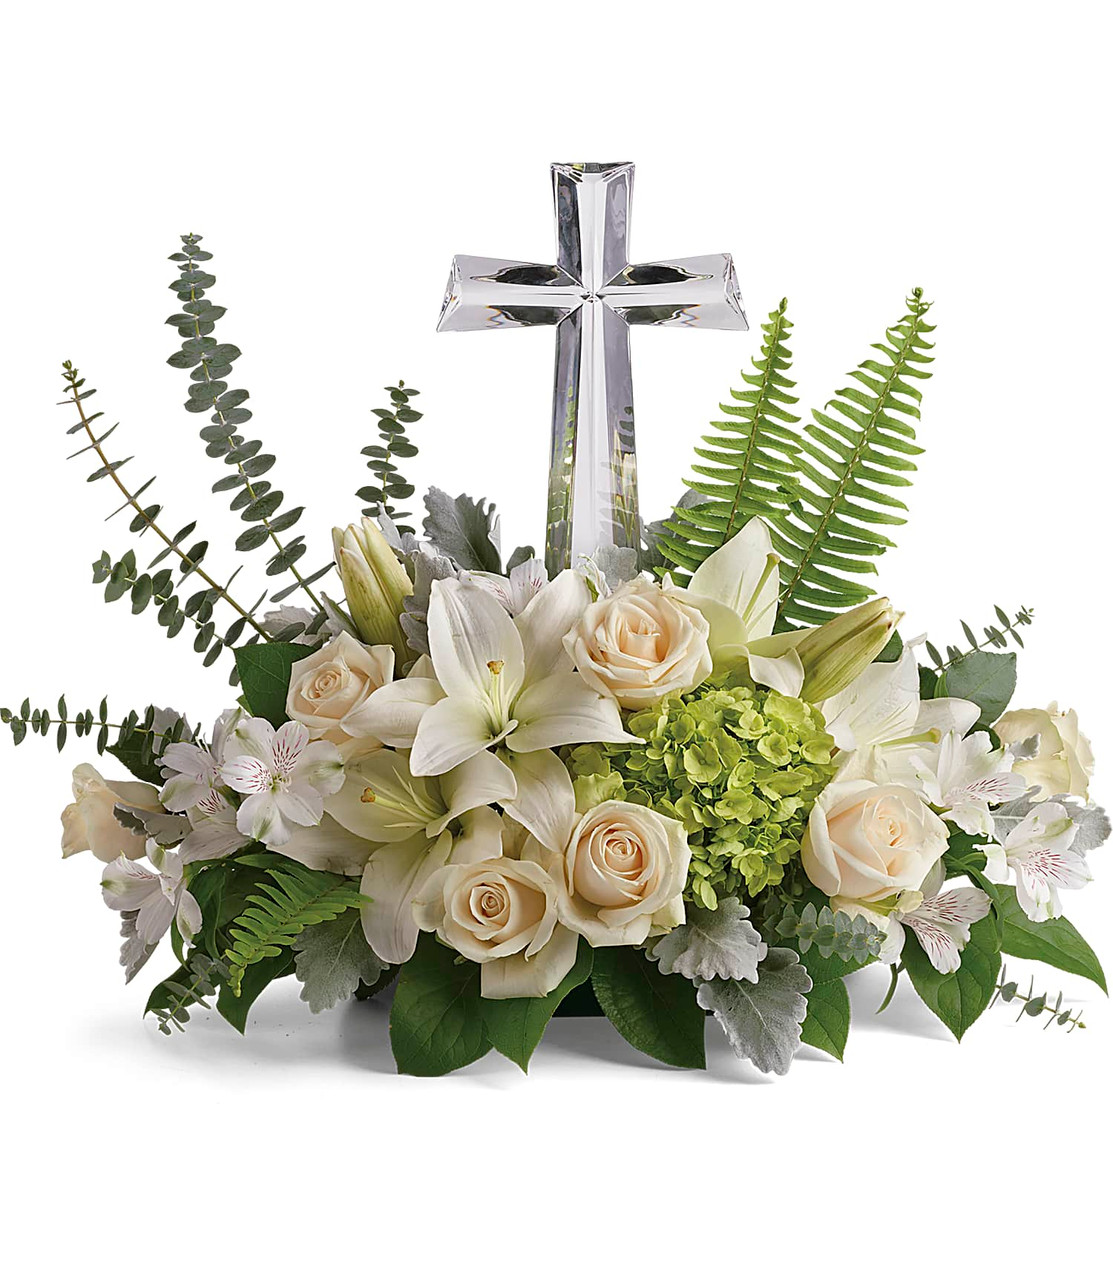 Cheap Funeral Flowers Outlets Online, Save 45% | jlcatj.gob.mx